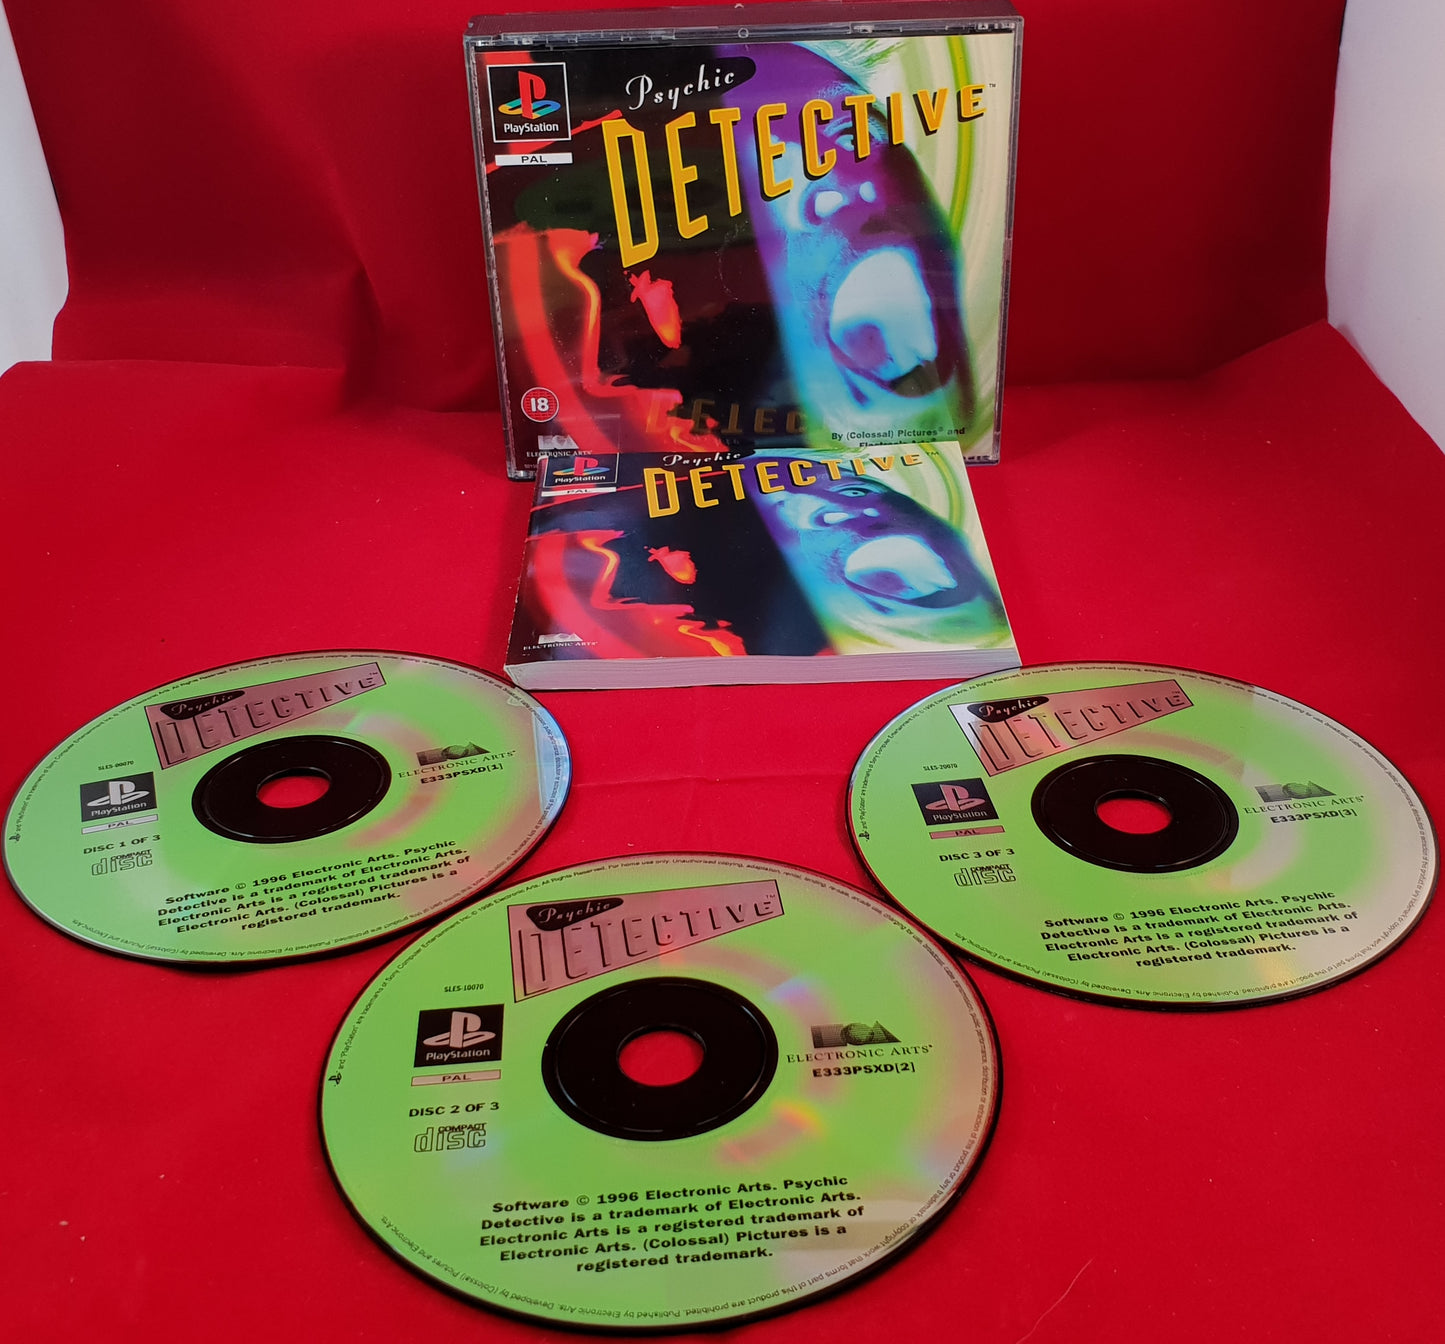 Psychic Detective Sony Playstation 1 (PS1) Game